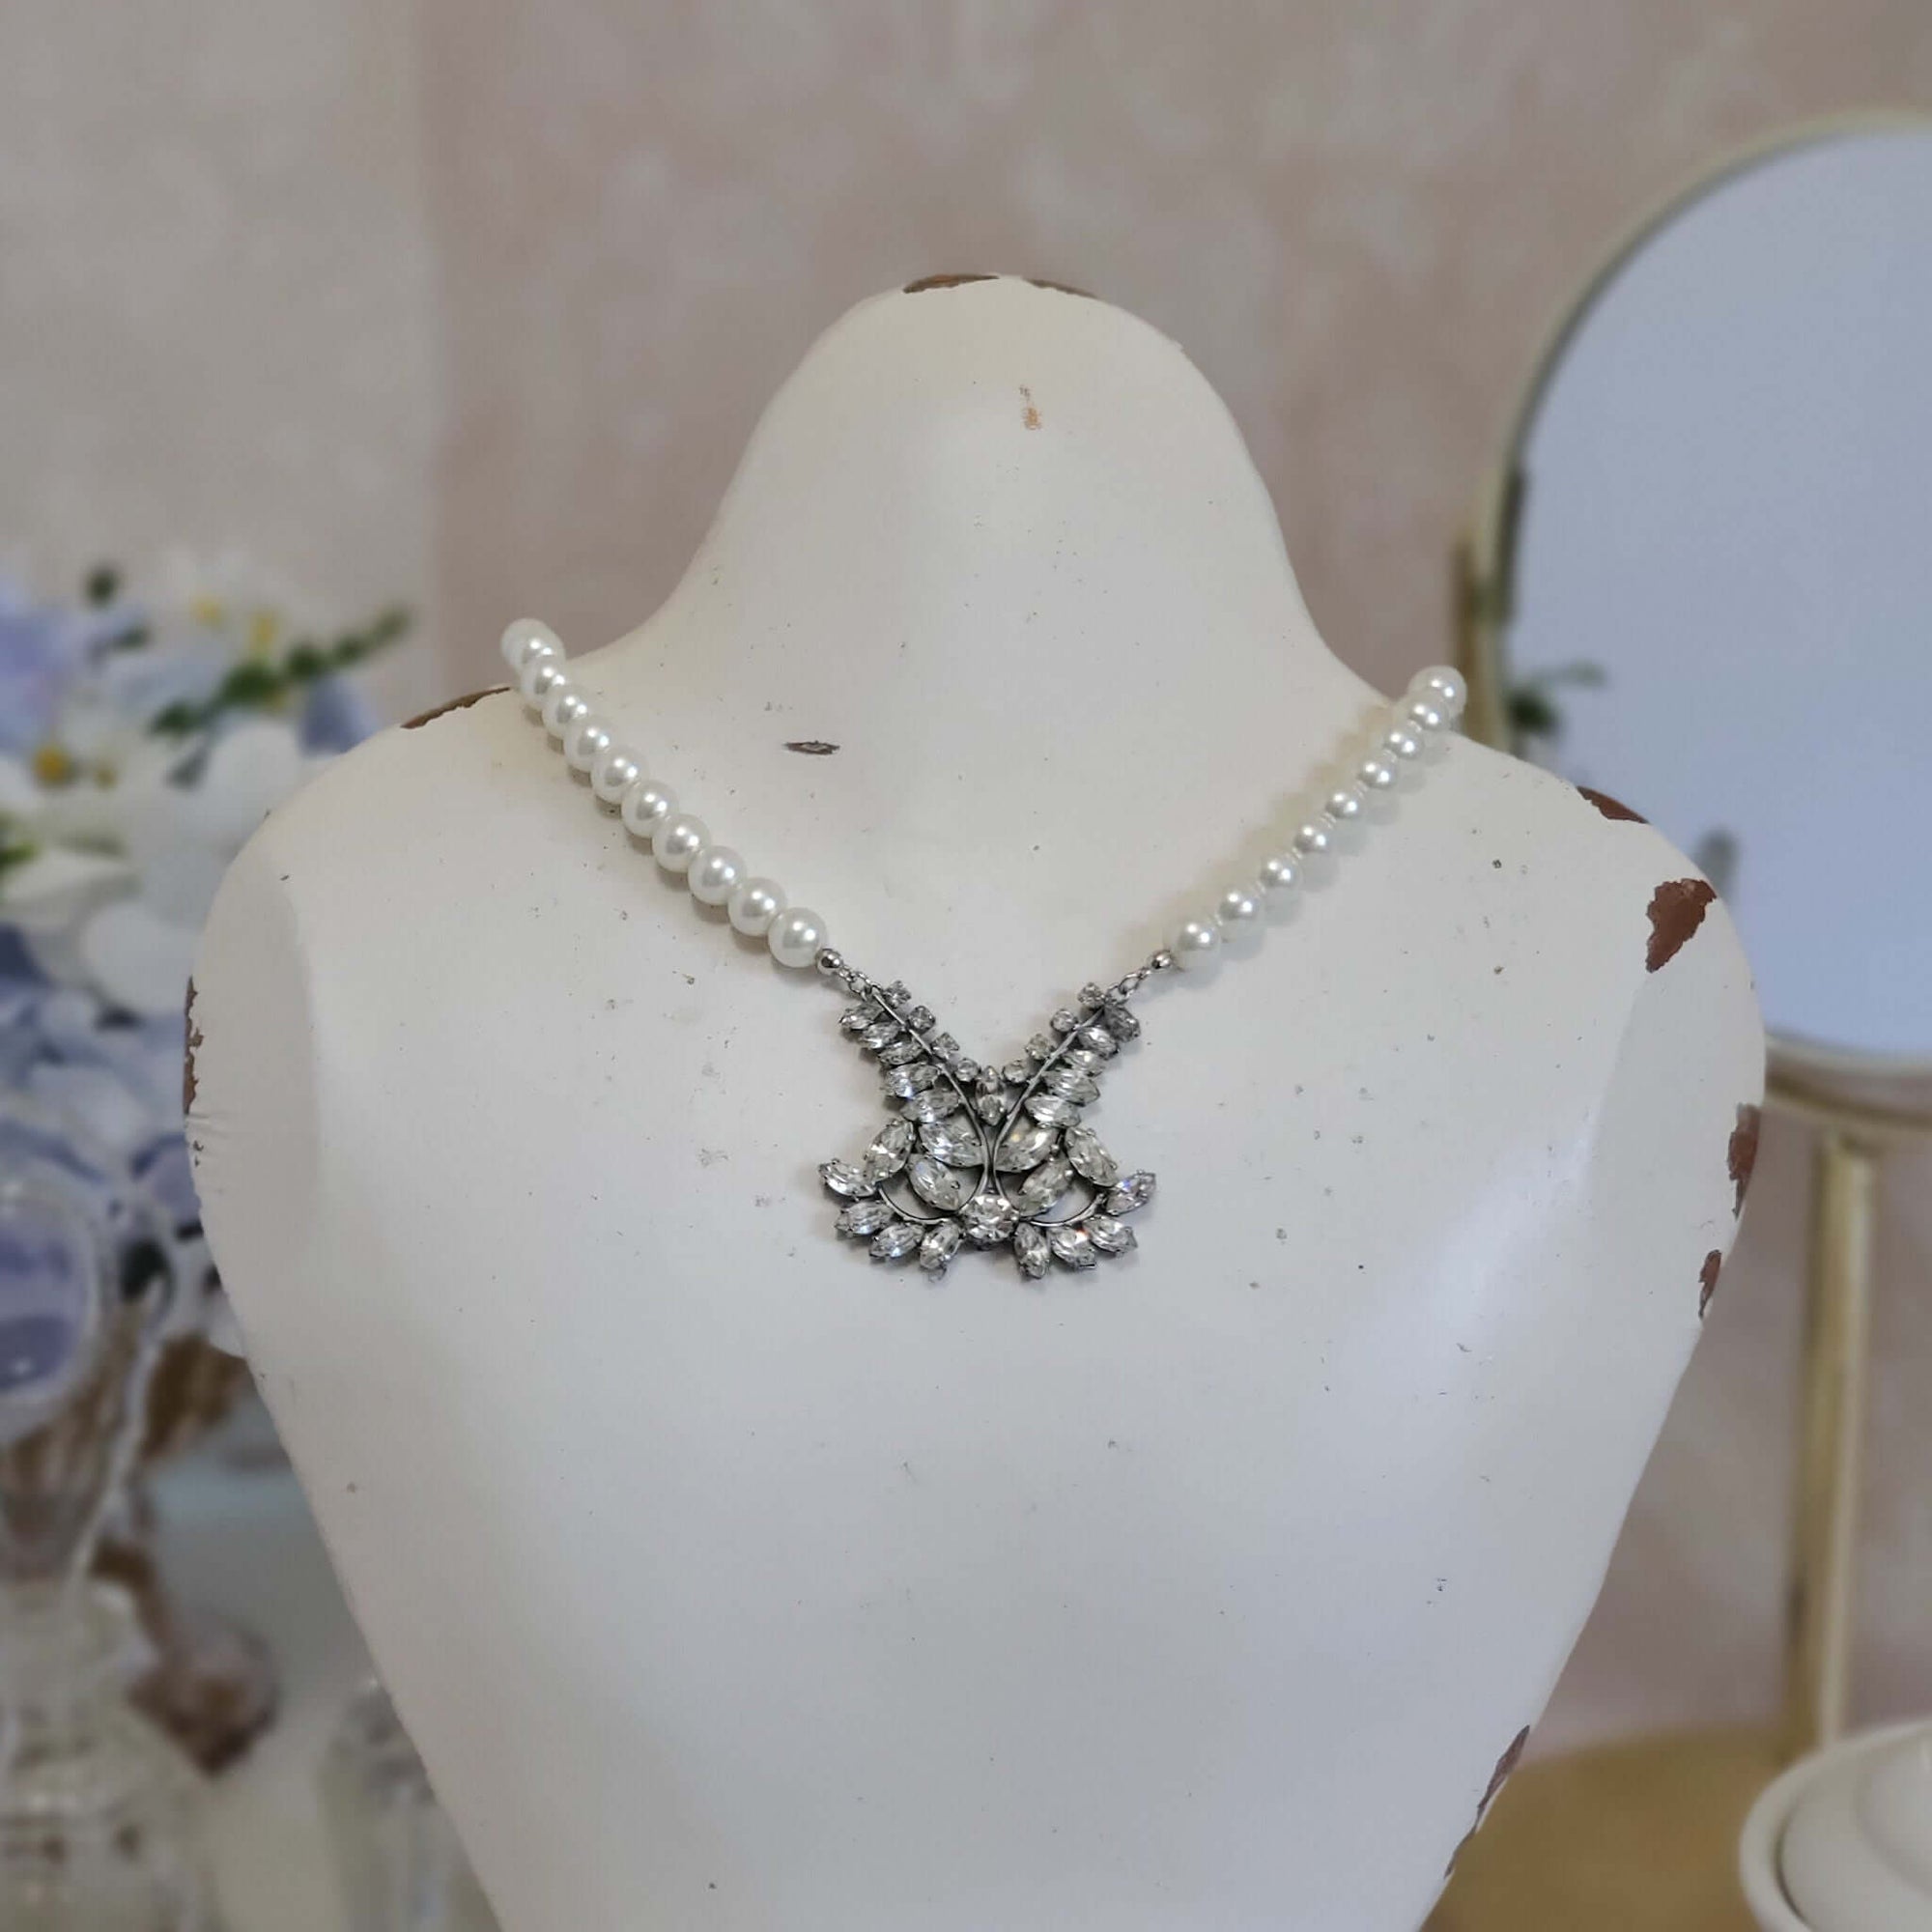 Vintage Pearl Necklace with Crystal Pendant